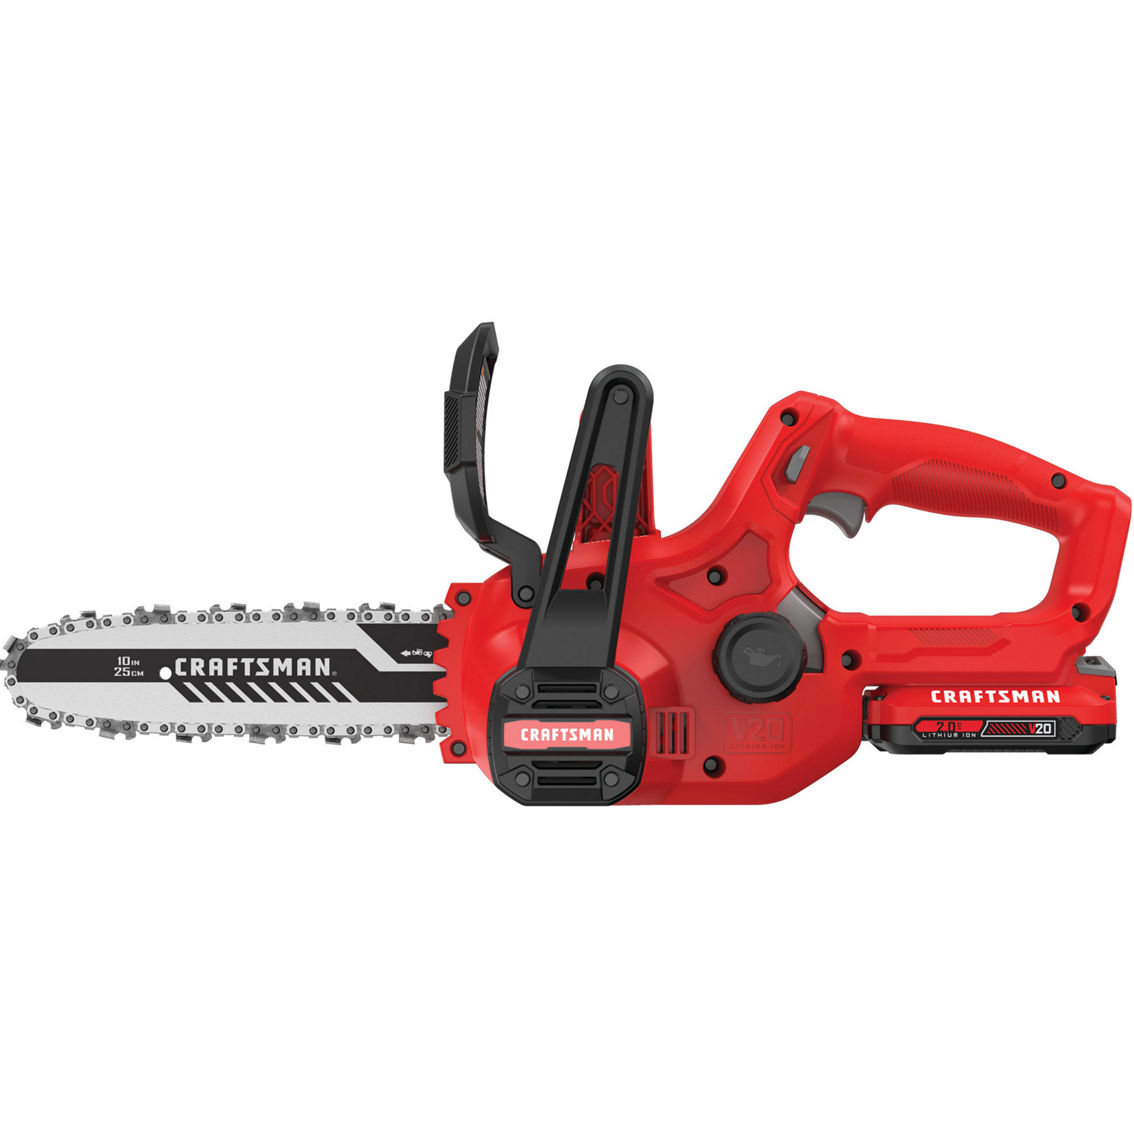 Craftsman 2.0Ah V20 10 in. Chainsaw - Image 2 of 5